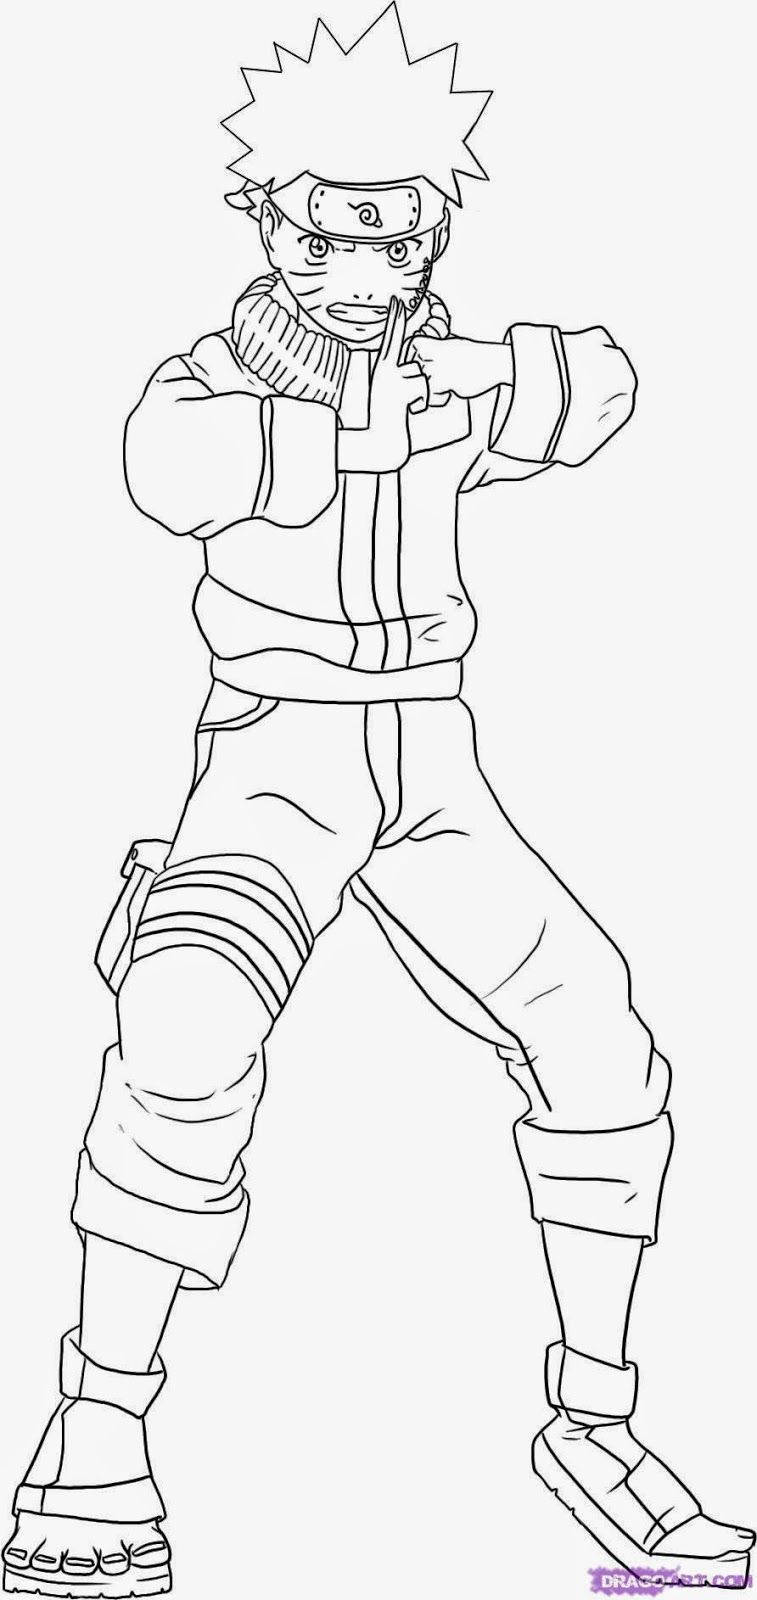 Naruto drawing full body with color